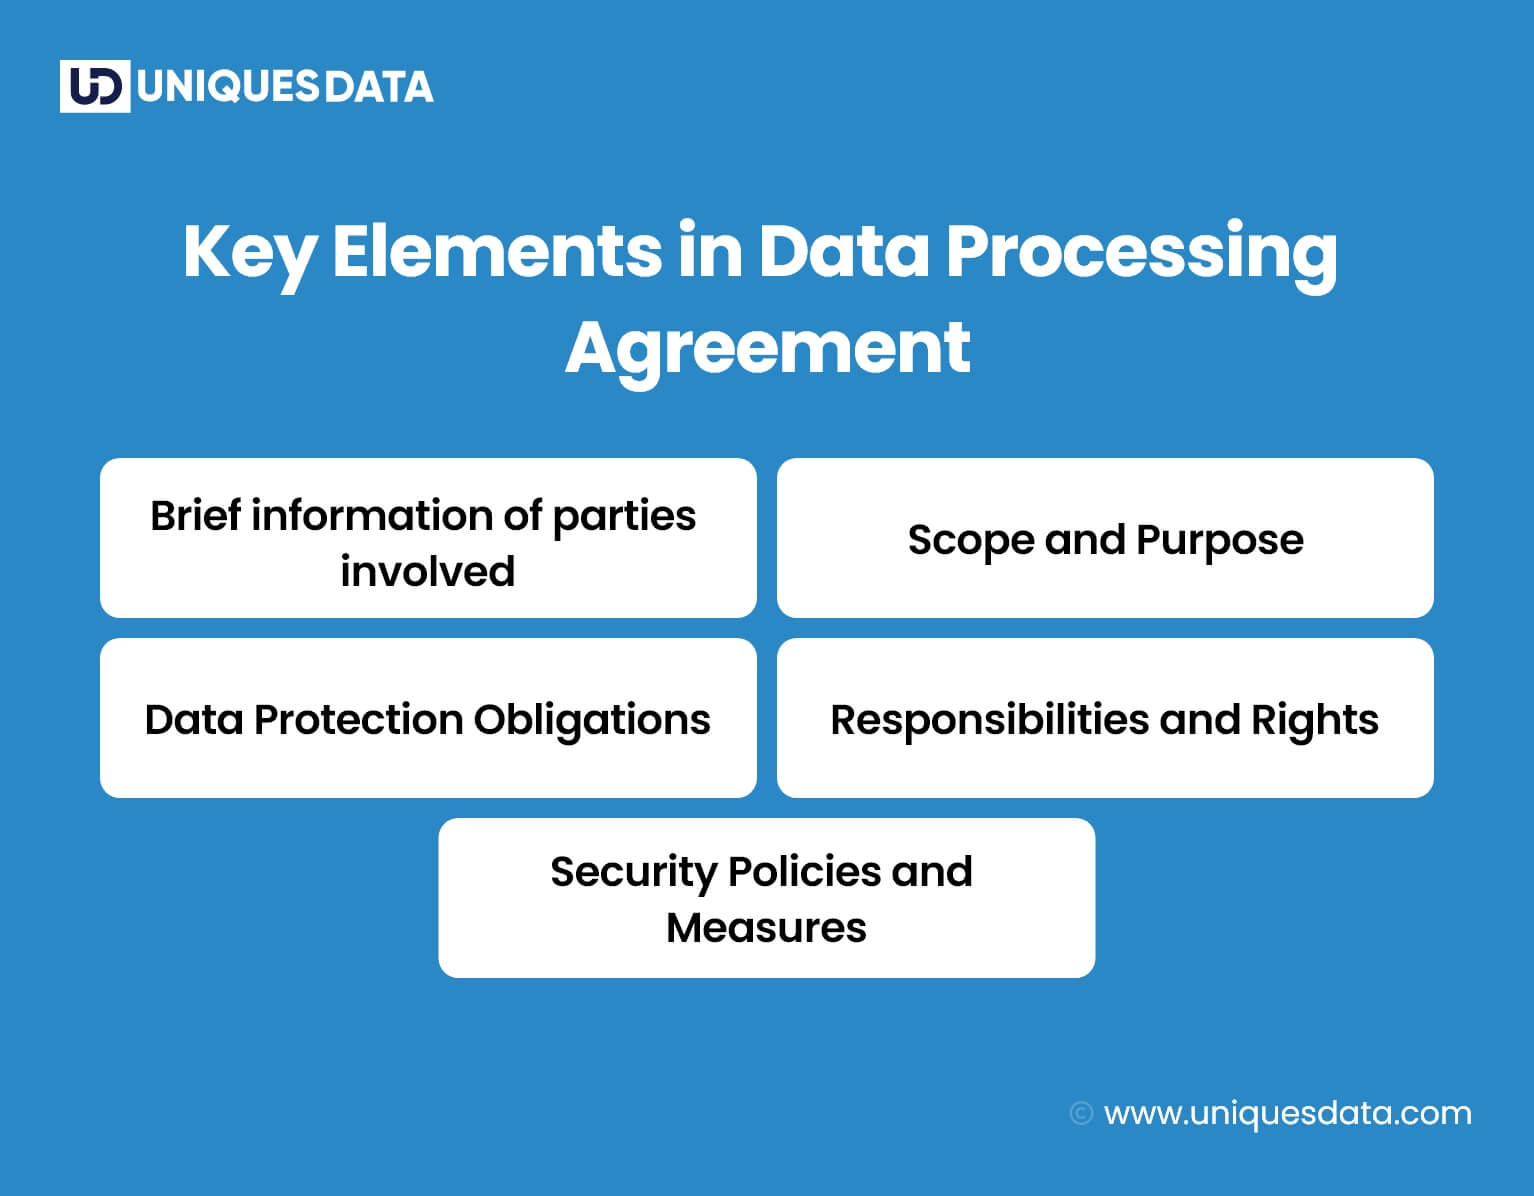 Key Elements in Data Processing Agreement